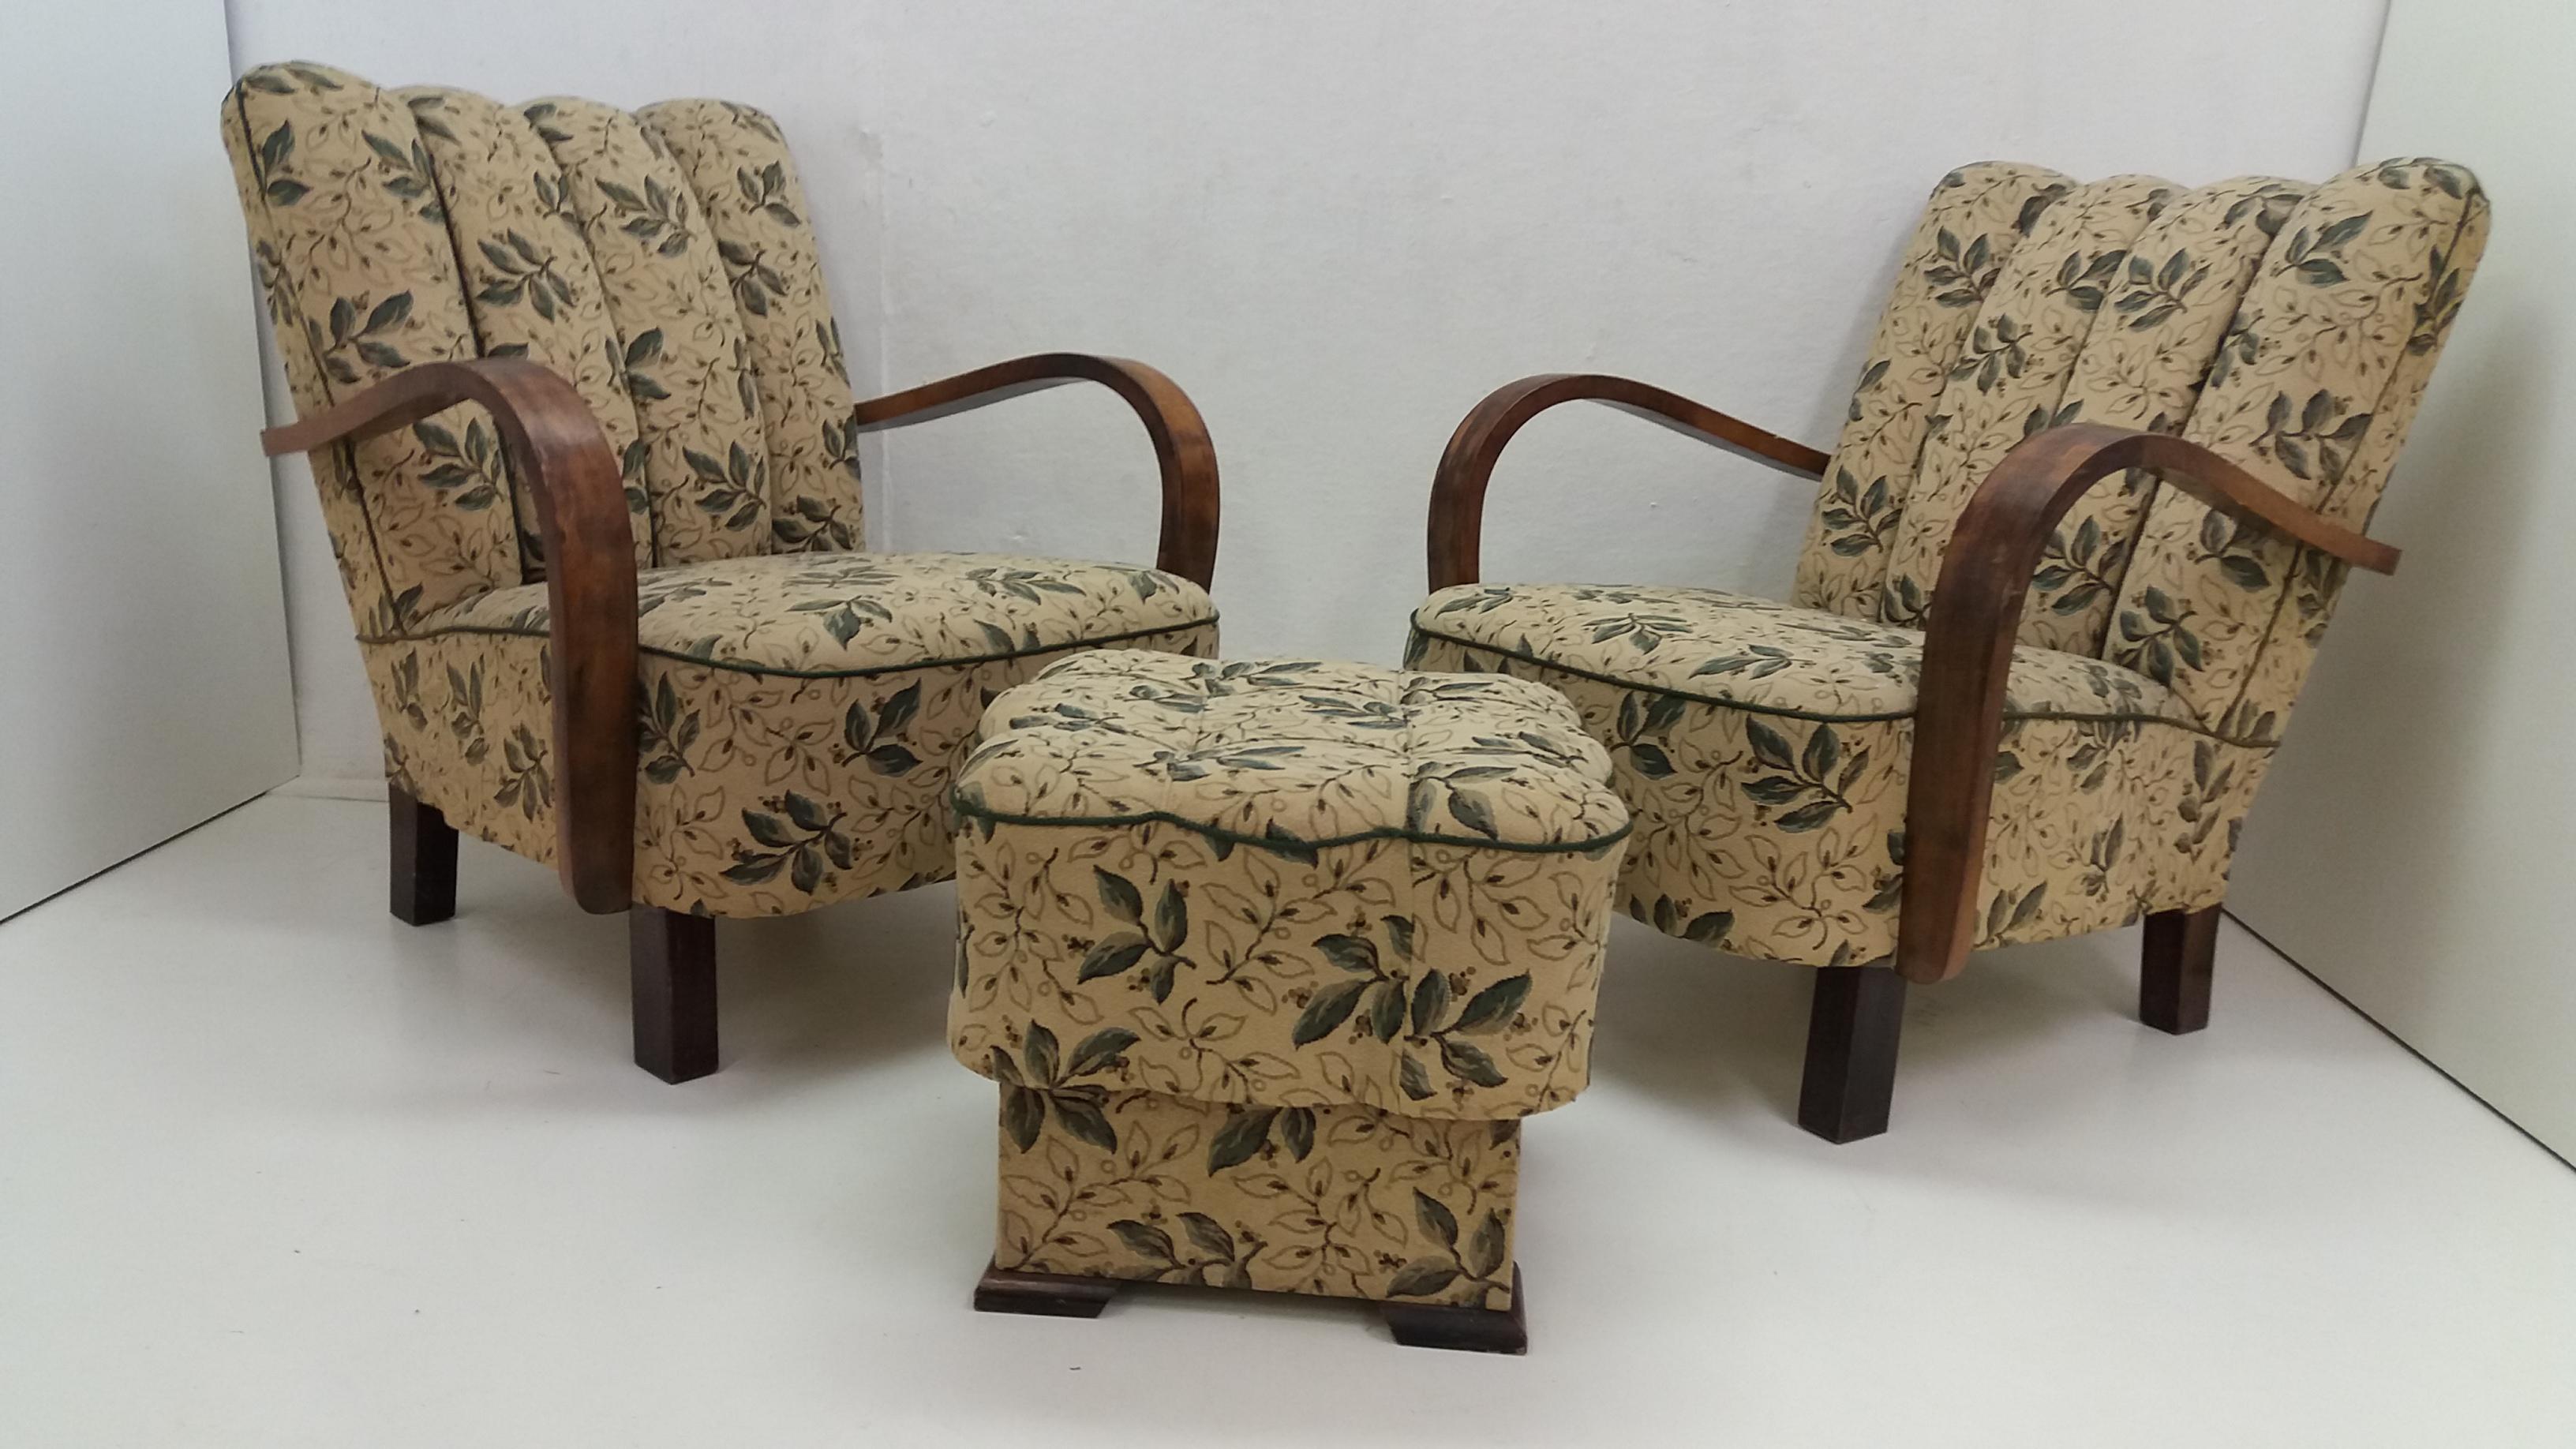 - Made in Czechoslovakia
- Made of beechwood, fabric
- Dimensions of footstool: H 38 x W 45 x D 45
- Maker: UP Závody Brno
- Designer: Jindřich Halabala
- Good, original condition.